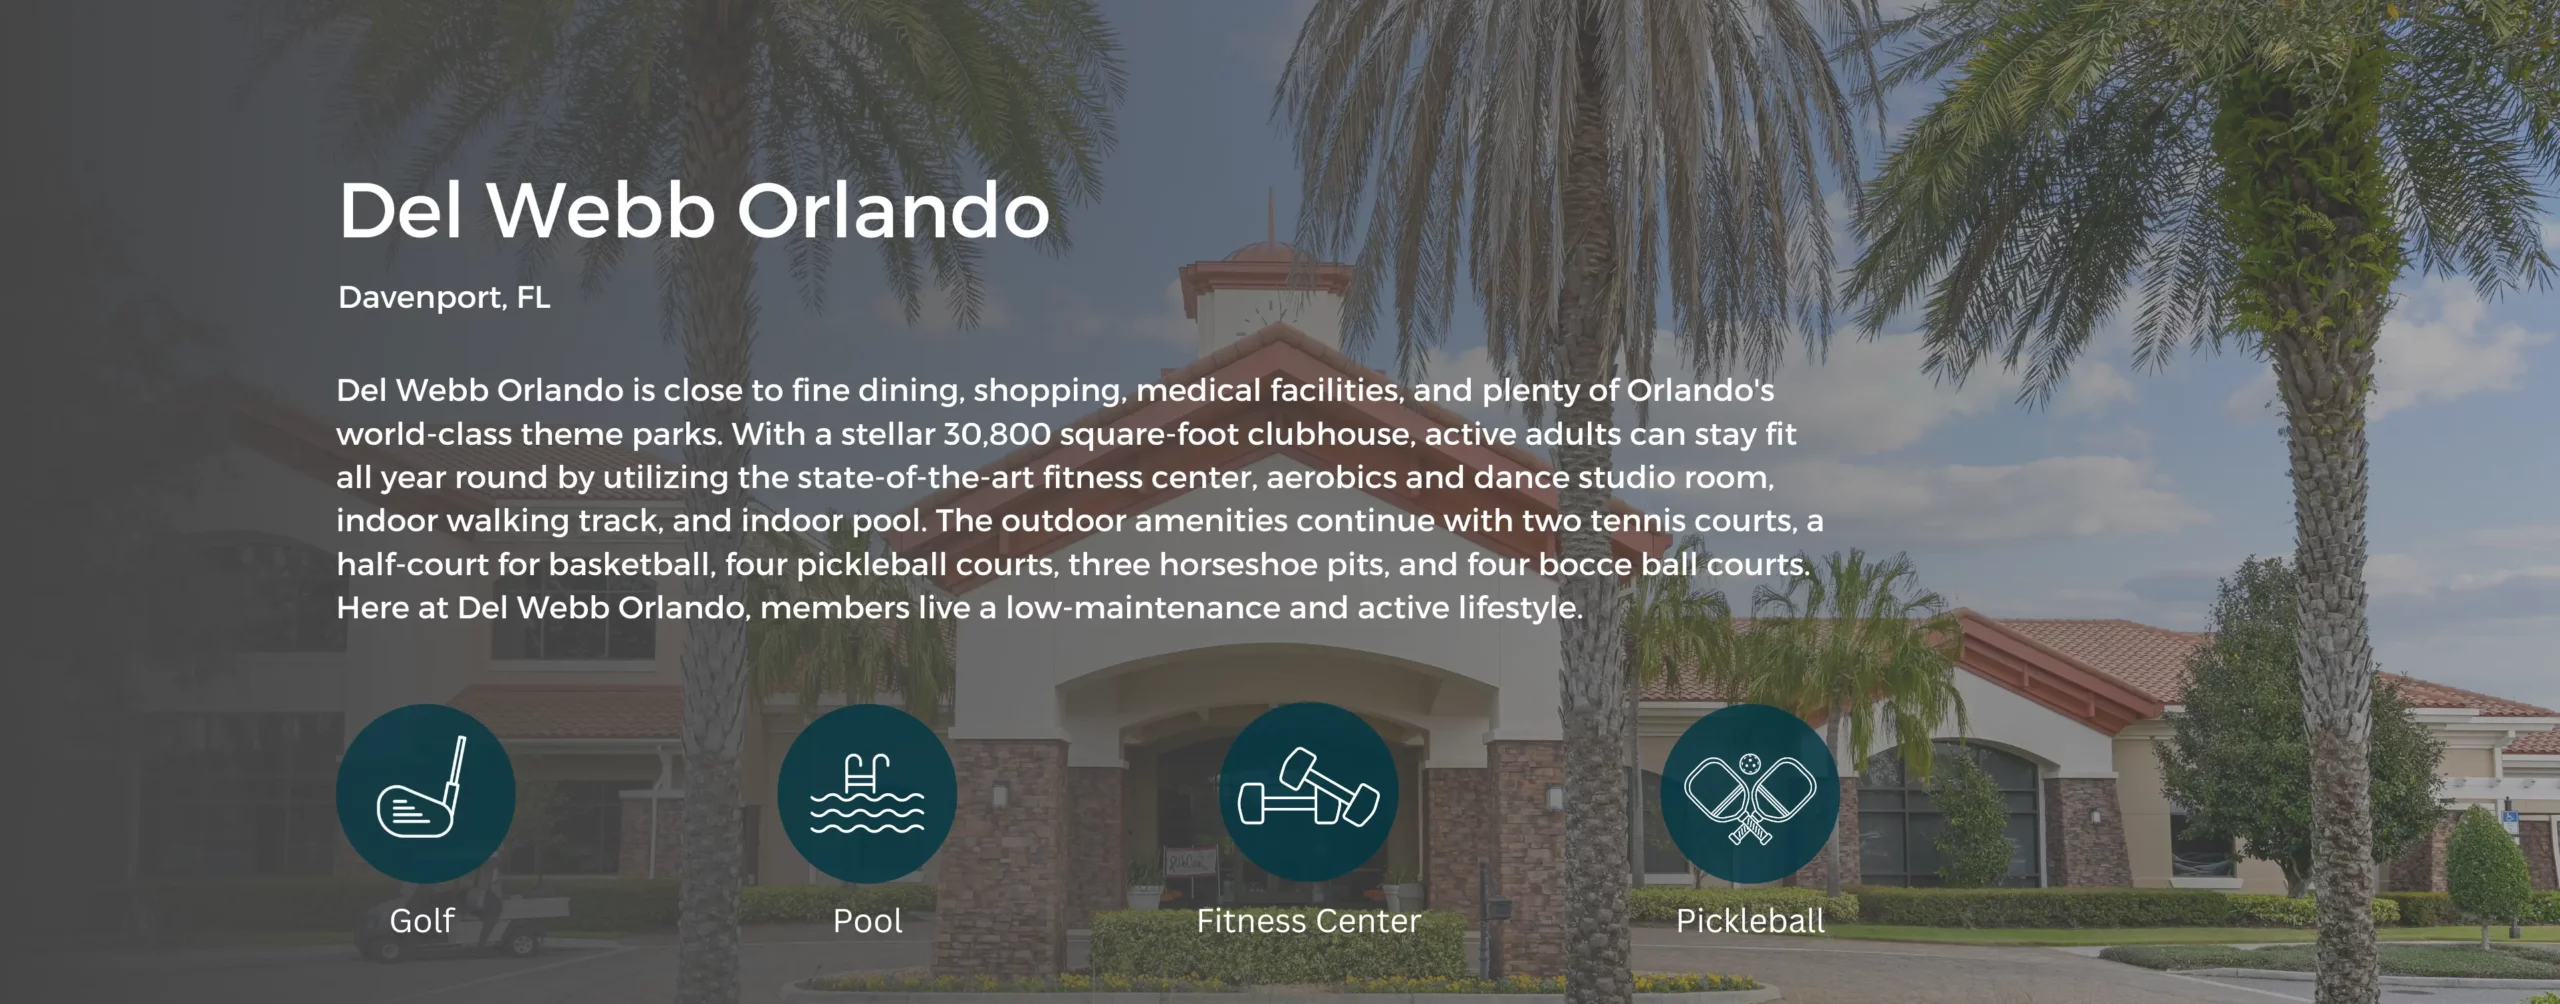 Icons that show Golf, Pool, Fitness Center, and Pickleball. Background image is a clubhouse.